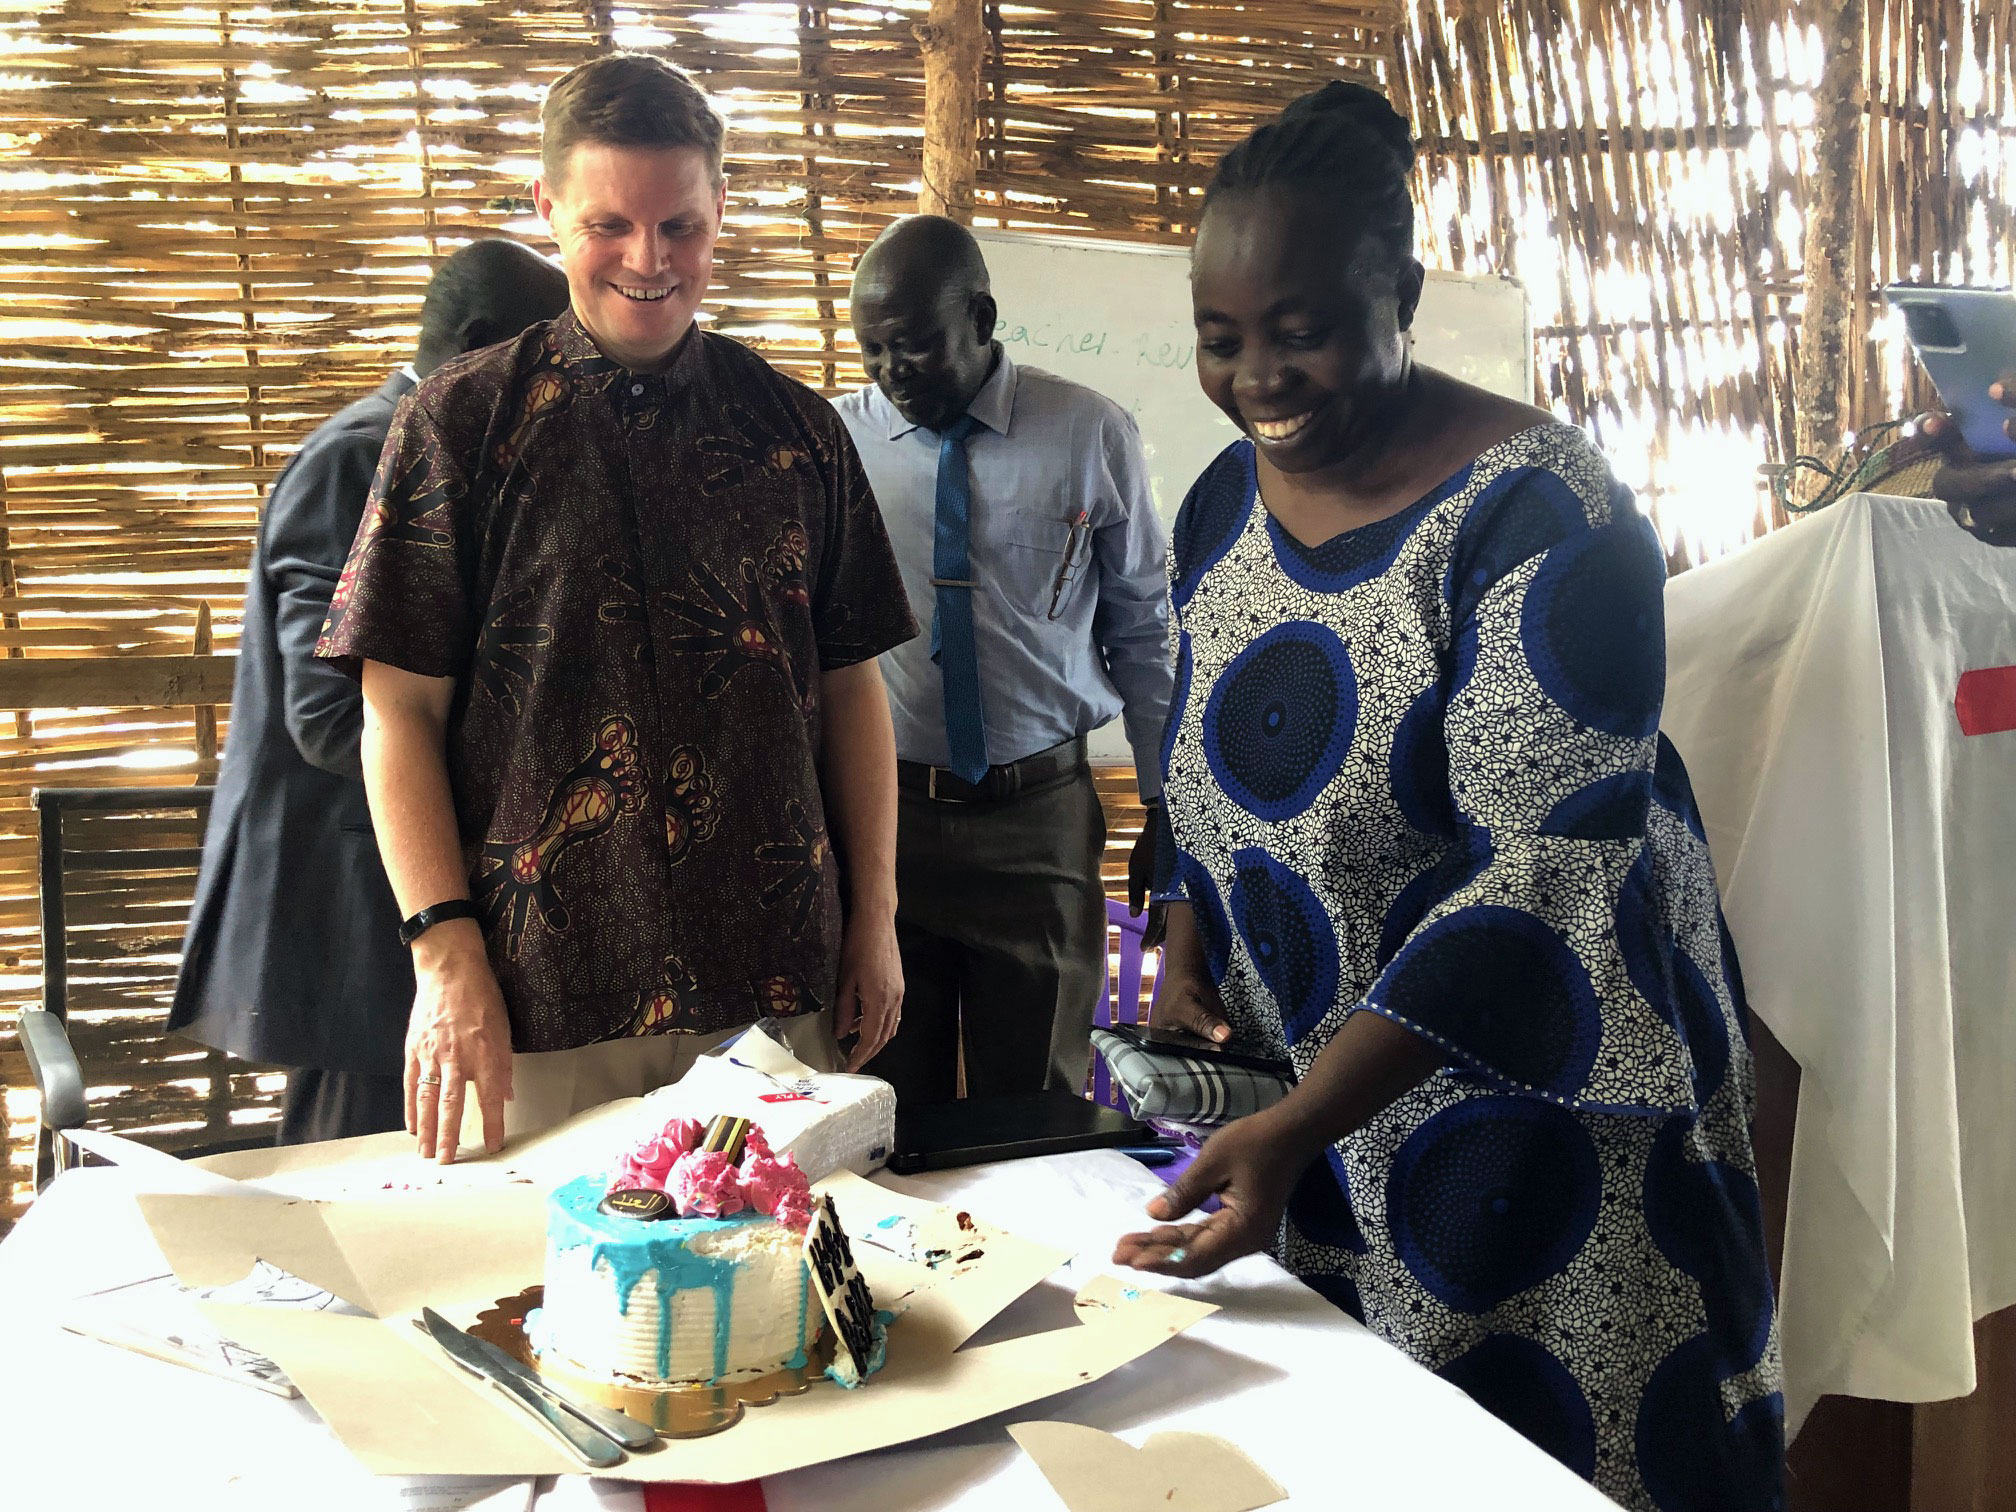 Bob celebrates his birthday (a big one!) at Nile Theological College with students, staff and faculty.